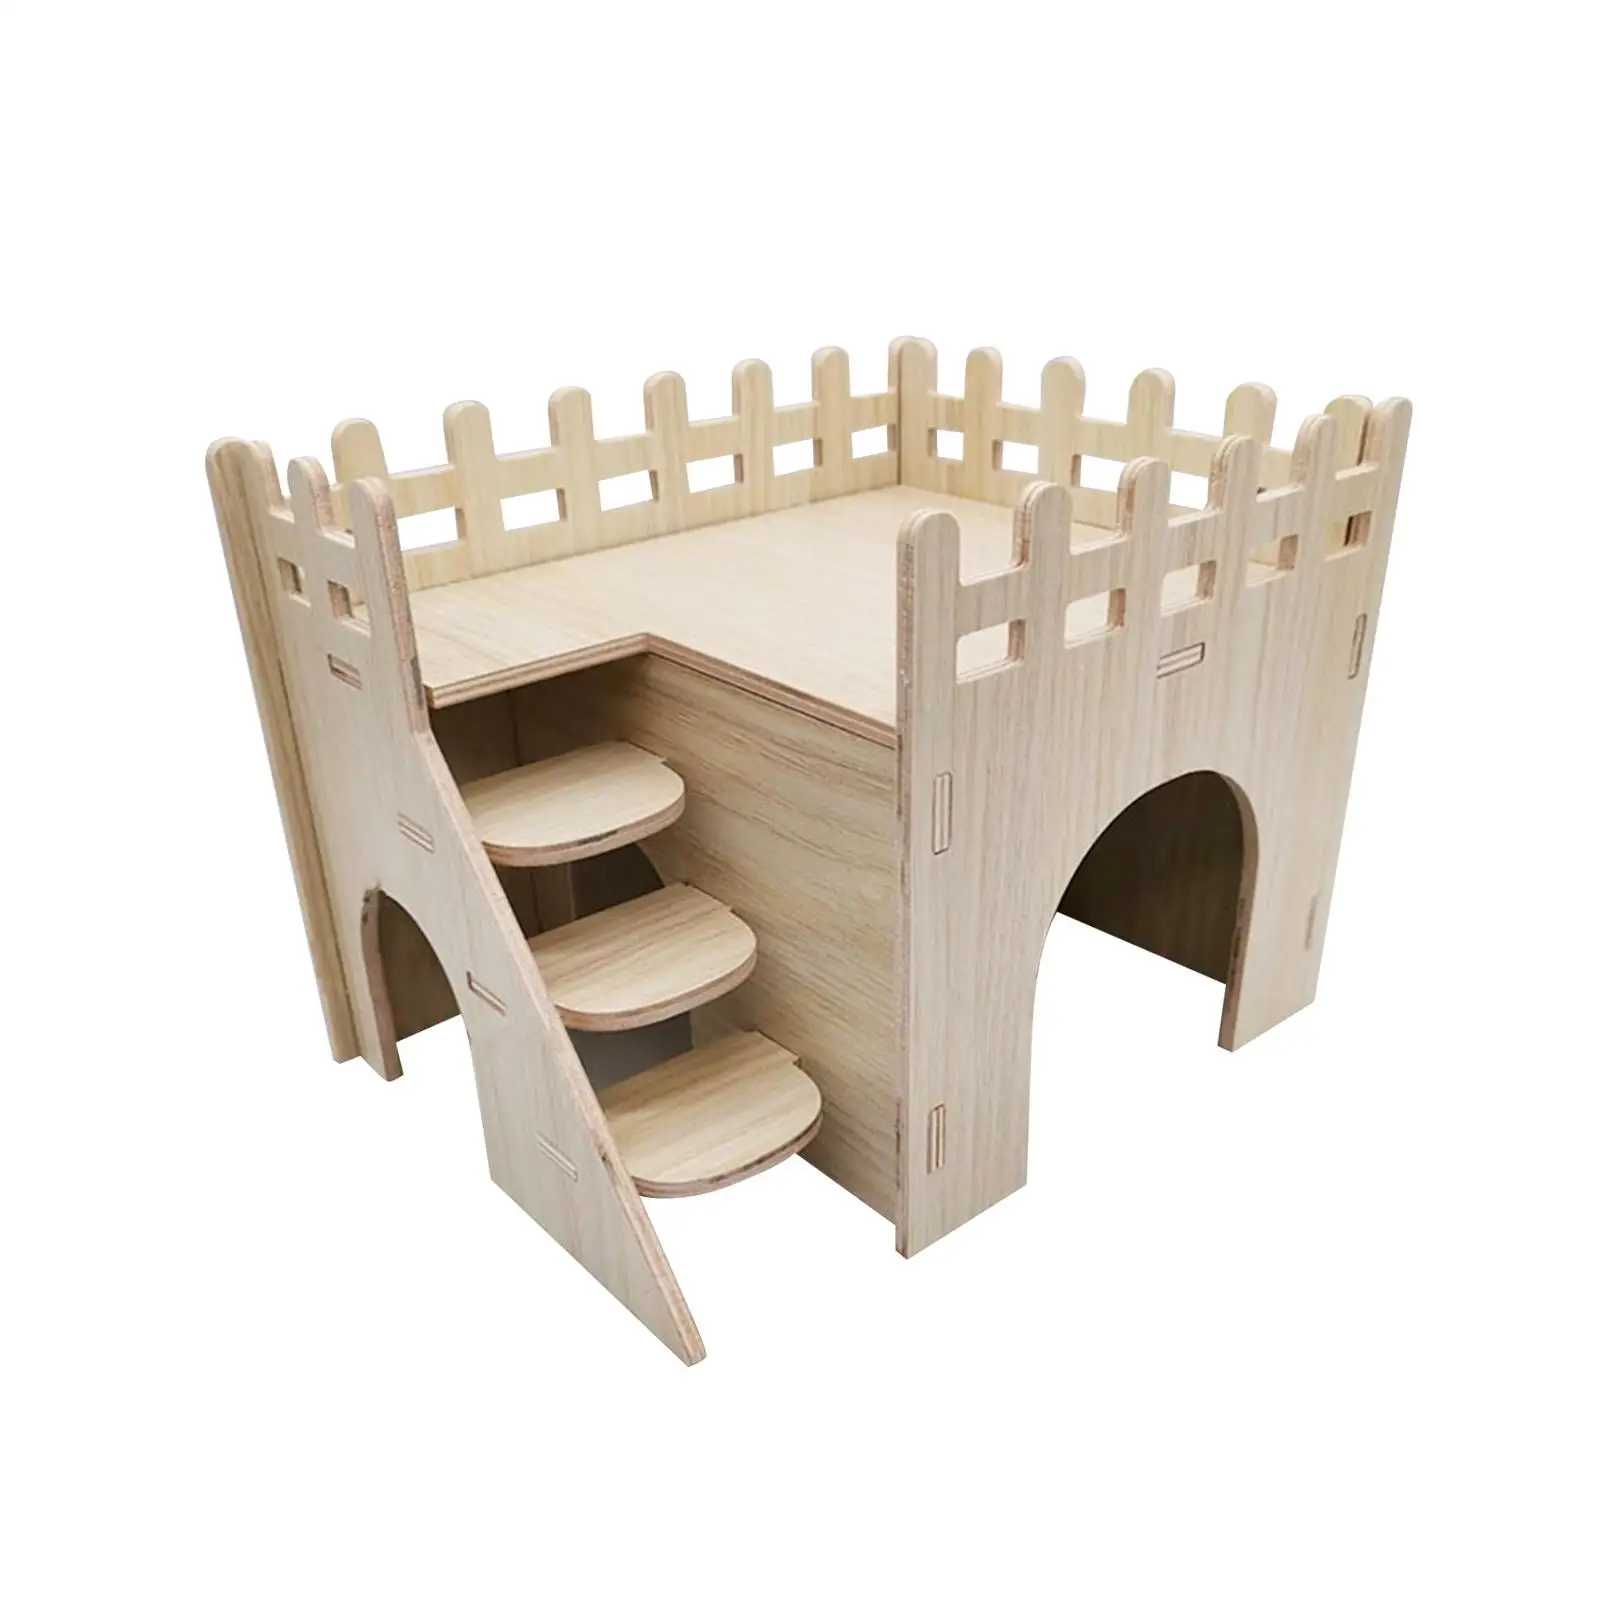 Hamster House Exercise Toy Easy to Assemble Activity Platform Exploring Toys Cage Nesting Villa for Rat Hedgehog Guinea Pig Mice